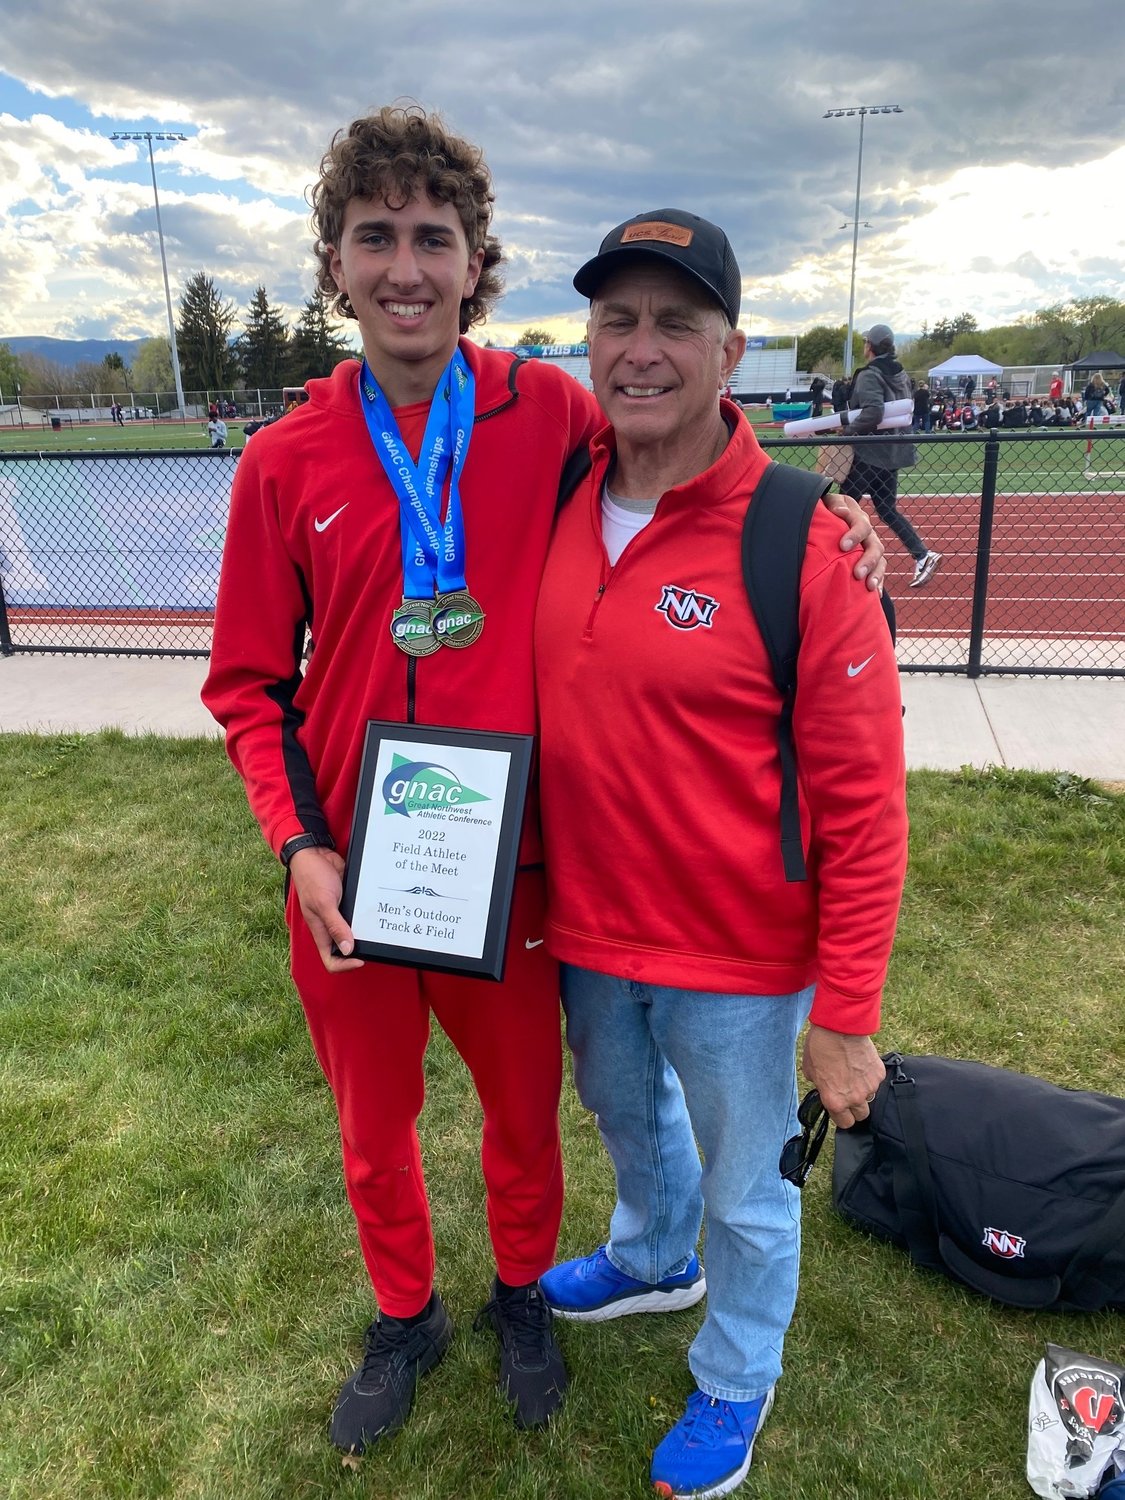 Steven Schmidt is pictured with his coach, John Mahr, during his last meet on May 14.